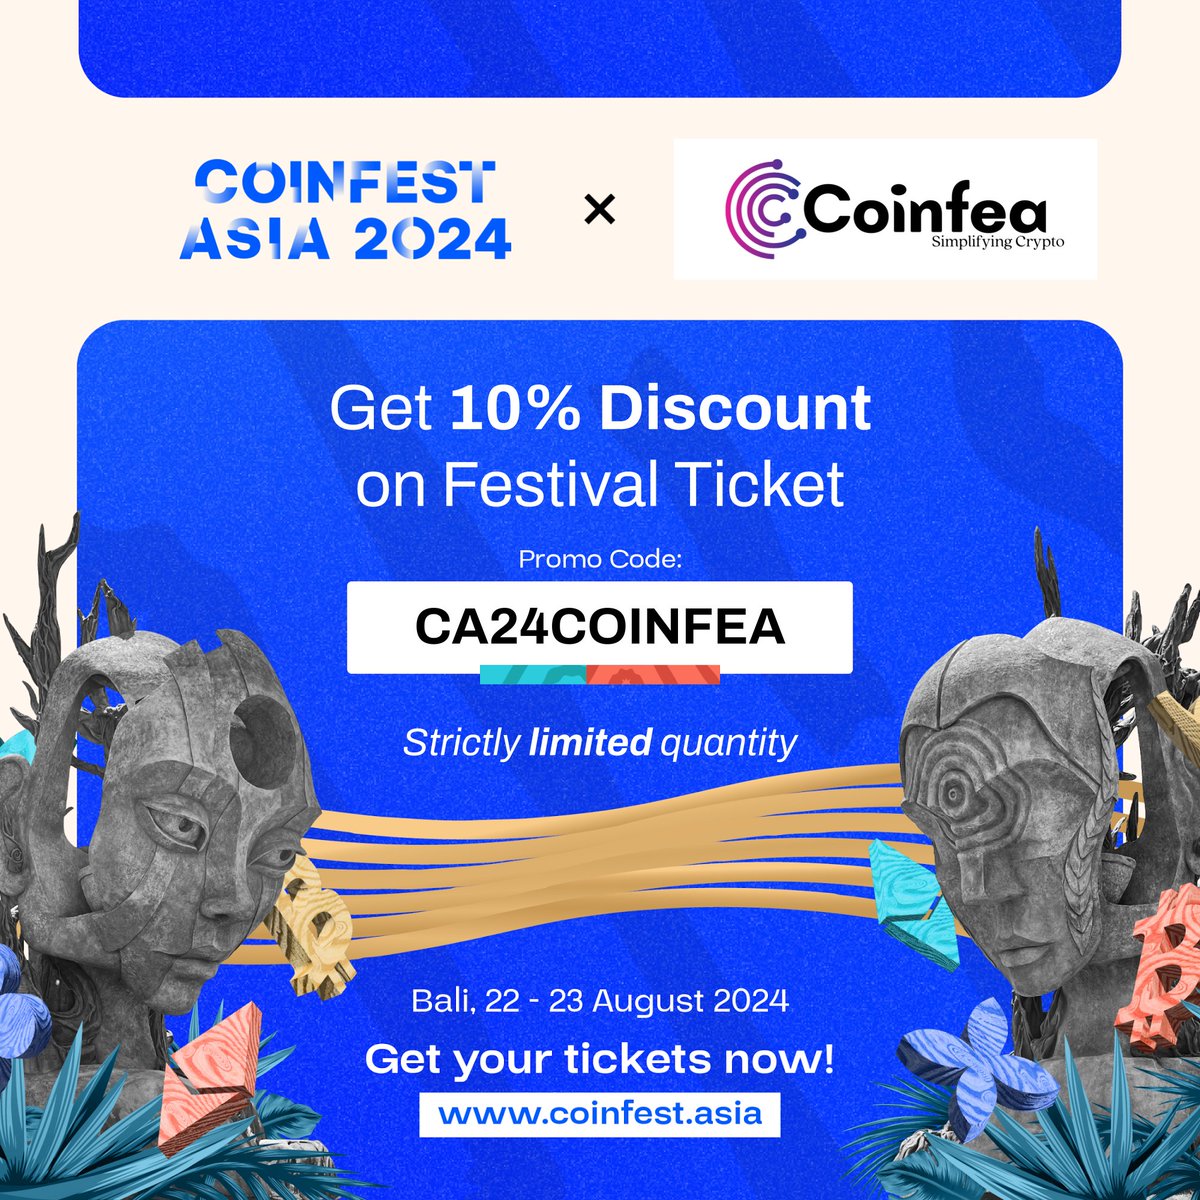 Coinfea is Coinfest Asia 2024's official media partner! 🤝 ☀️ Take part in Asia’s immersive Web3 festival, where innovation meets adoption. 🎟 Get your tickets at coinfest.asia and use our special promo code: CA24COINFEA to get 10% off!